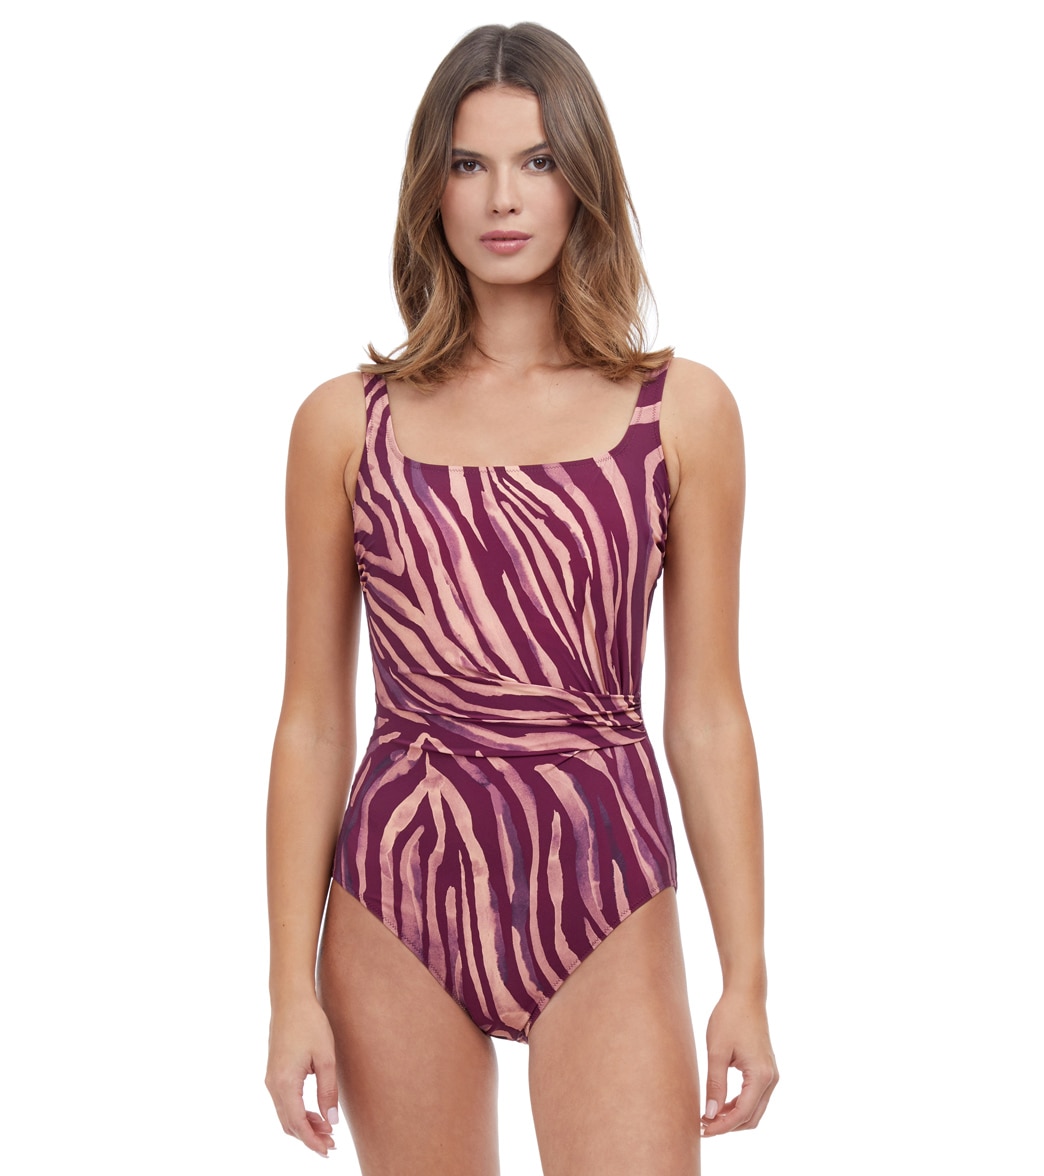 Gottex Women's Panthera Square Neck One Piece Swimsuit